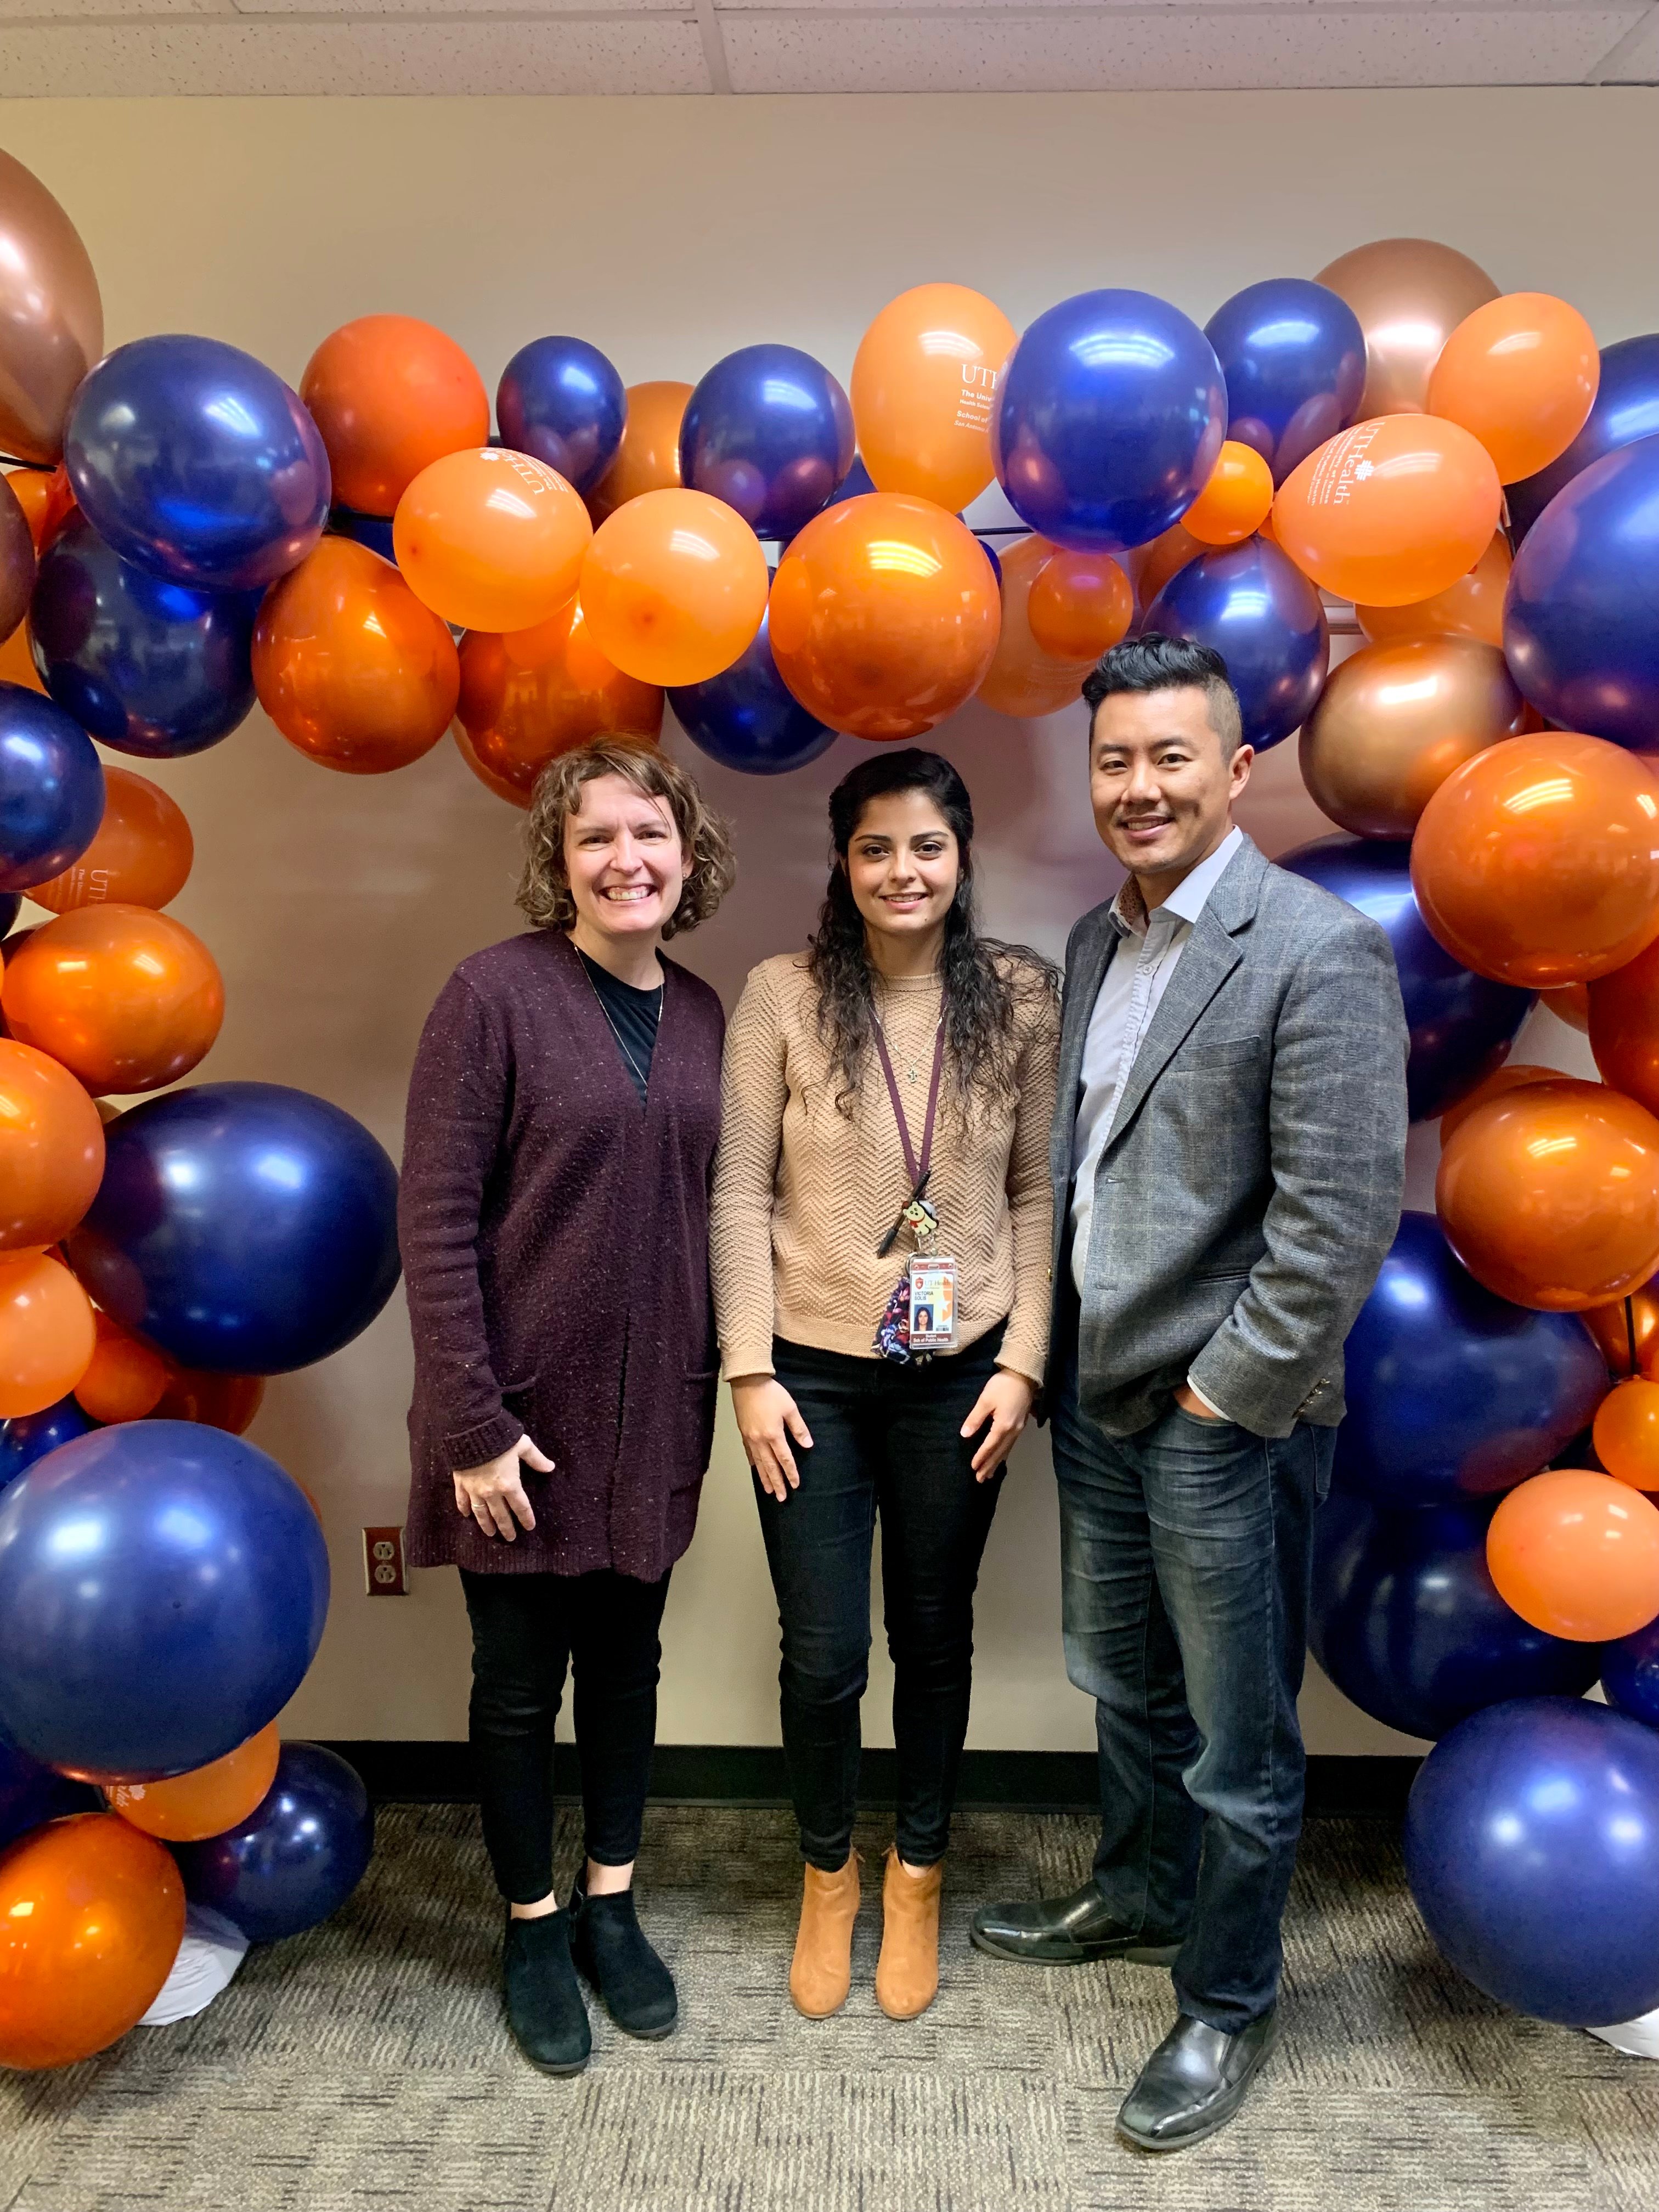 Victoria Solis stands between a man and a woman under an arch of orange and blue balloons